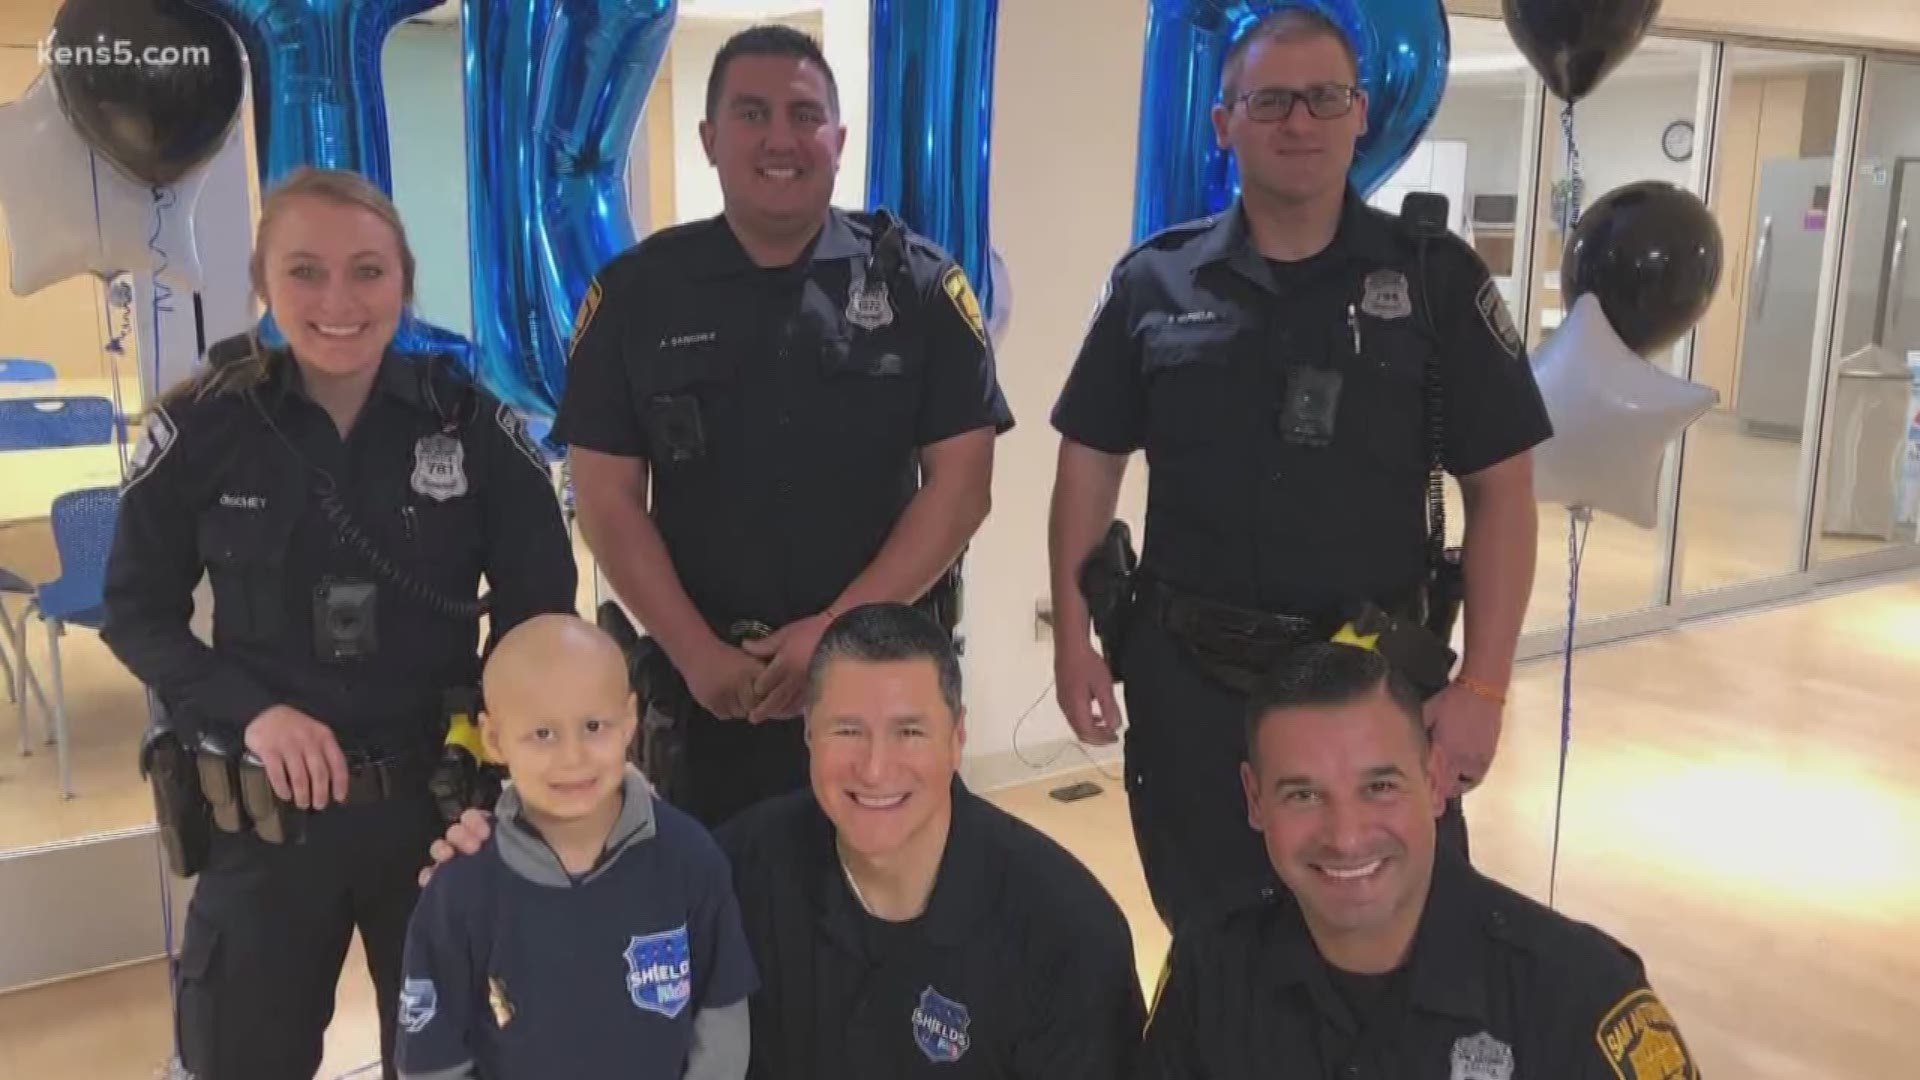 A 6-year-old San Antonio boy is now fighting cancer for the second time. Just after his birthday, Iker found out he had a tumor in his lung. Now, he must leave schoo